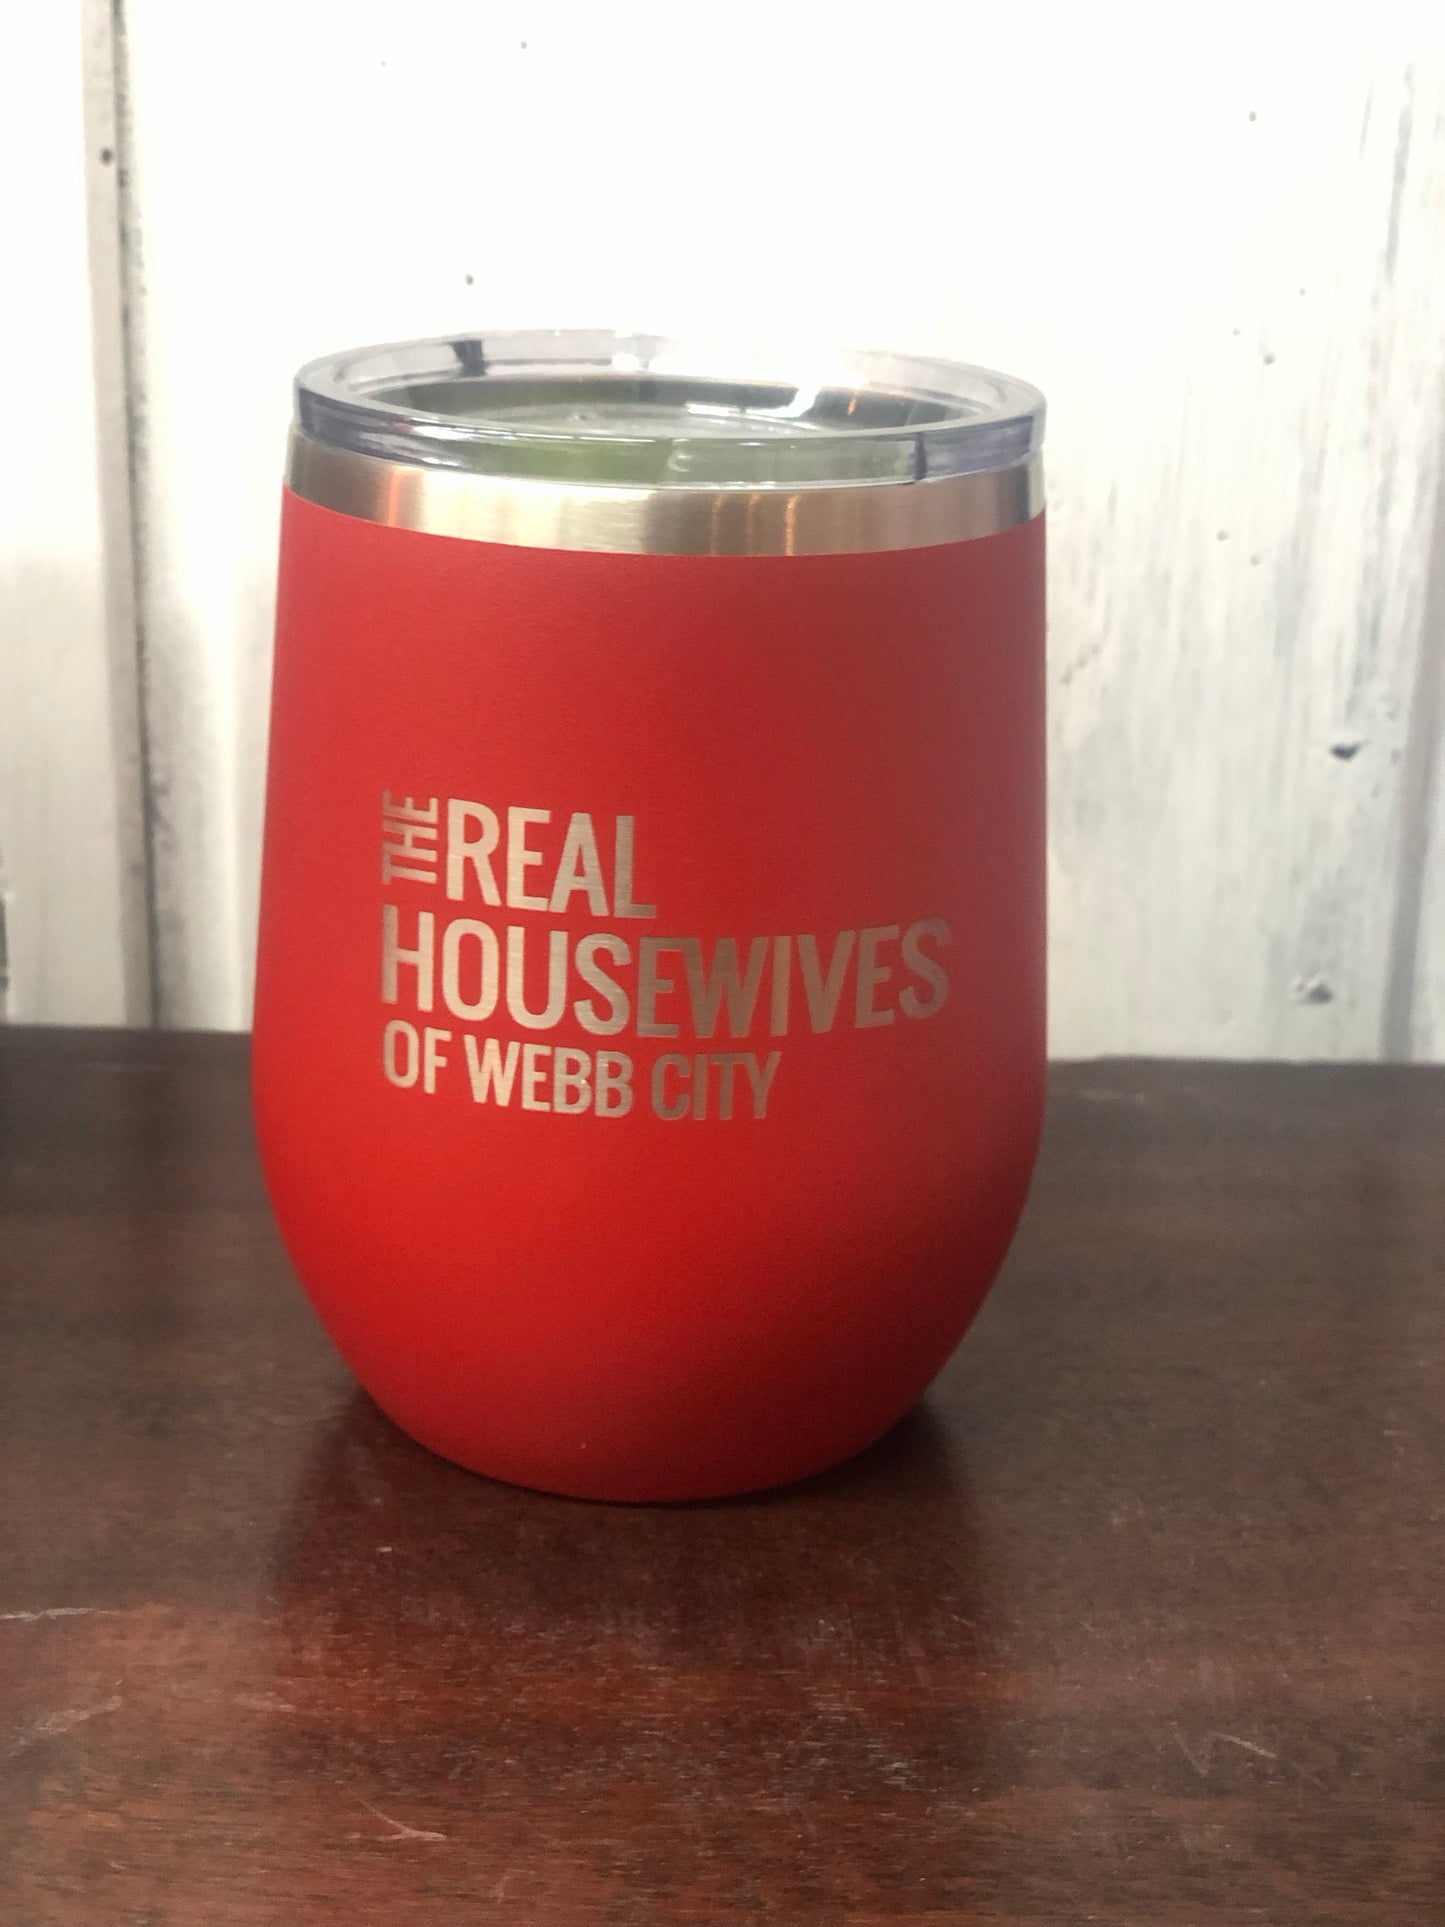 The Real Housewives of Webb City  12 oz. Wine Tumbler - Red